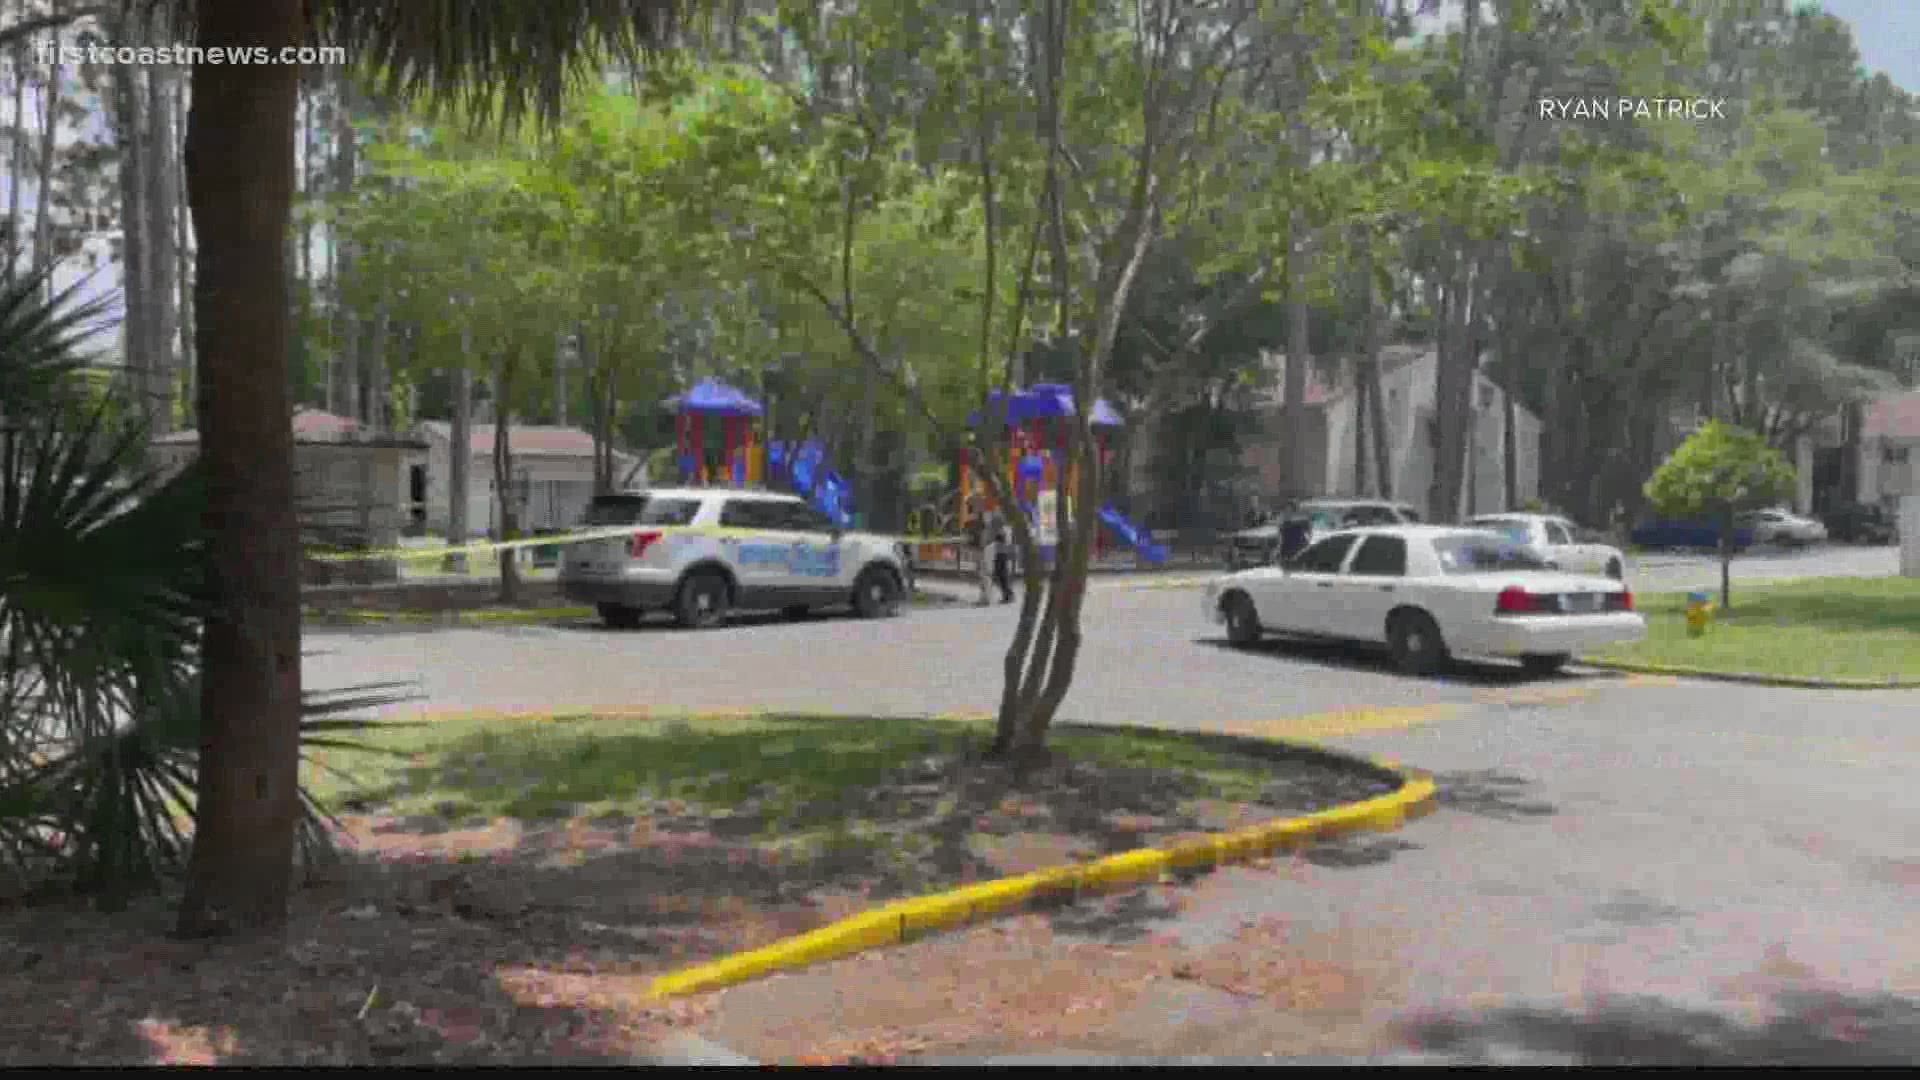 The shooting happened at Cumberland Oaks Apartments at about 2:08 p.m., according to the St. Marys Police Department.